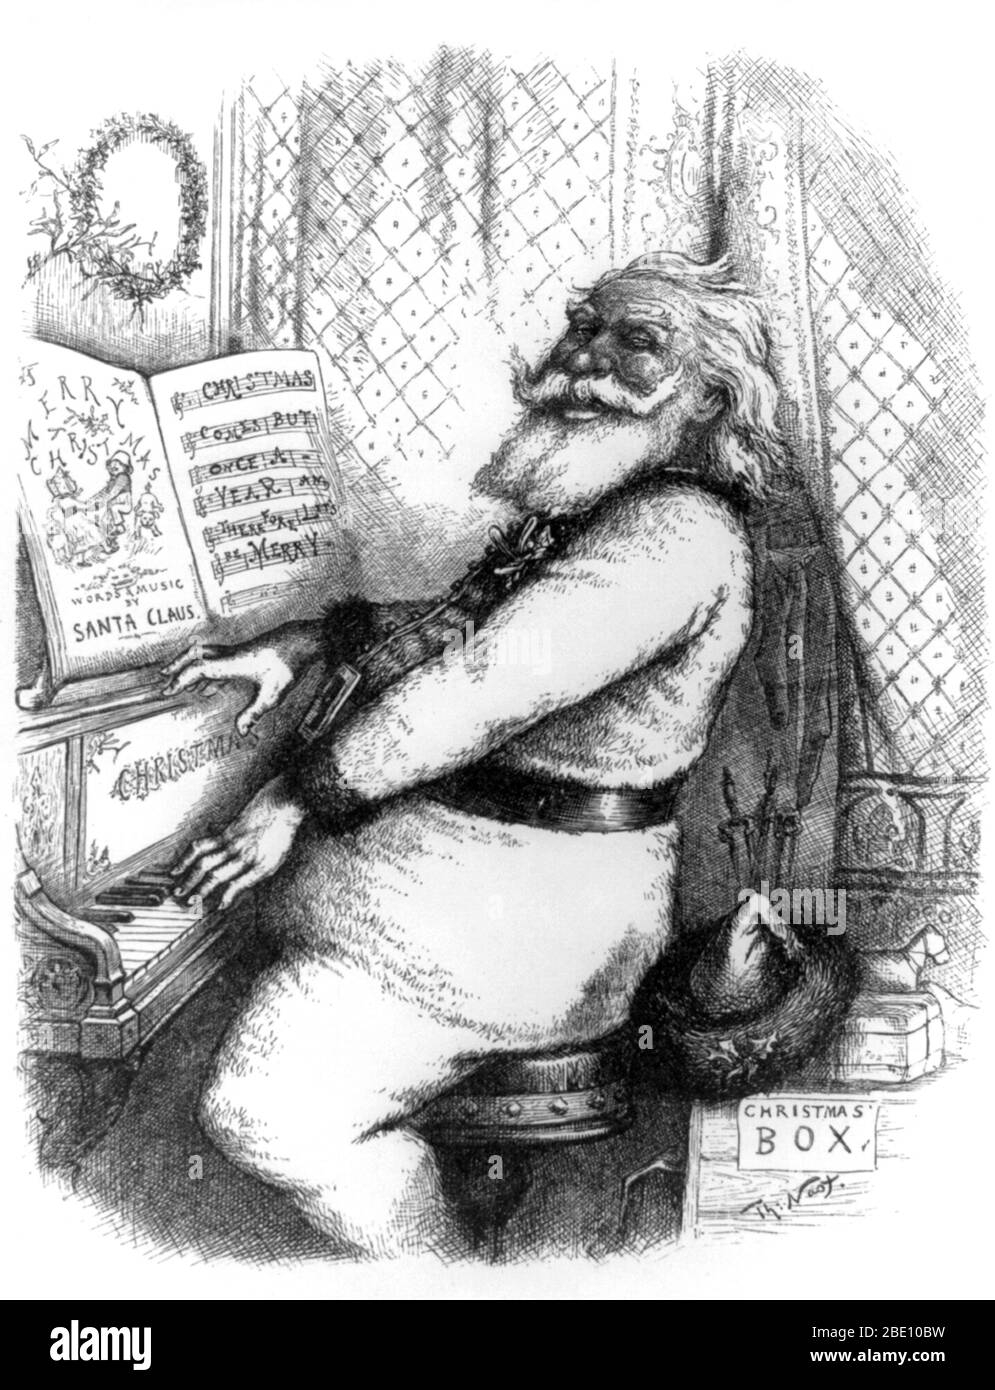 Entitled: 'For he's a jolly good fellow, so say we all of us' engraving of Santa Claus playing the piano. Santa Claus, also known as Saint Nicholas, Father Christmas, Kris Kringle and simply Santa, is a figure with legendary, historical and folkloric origins who, in many Western cultures, is said to bring gifts to the homes of the good children on December 24th, the night before Christmas Day. He is generally depicted as a portly, joyous, white-bearded man, sometimes with spectacles, wearing a red coat with white collar and cuffs, white-cuffed red trousers, and black leather belt and boots and Stock Photo